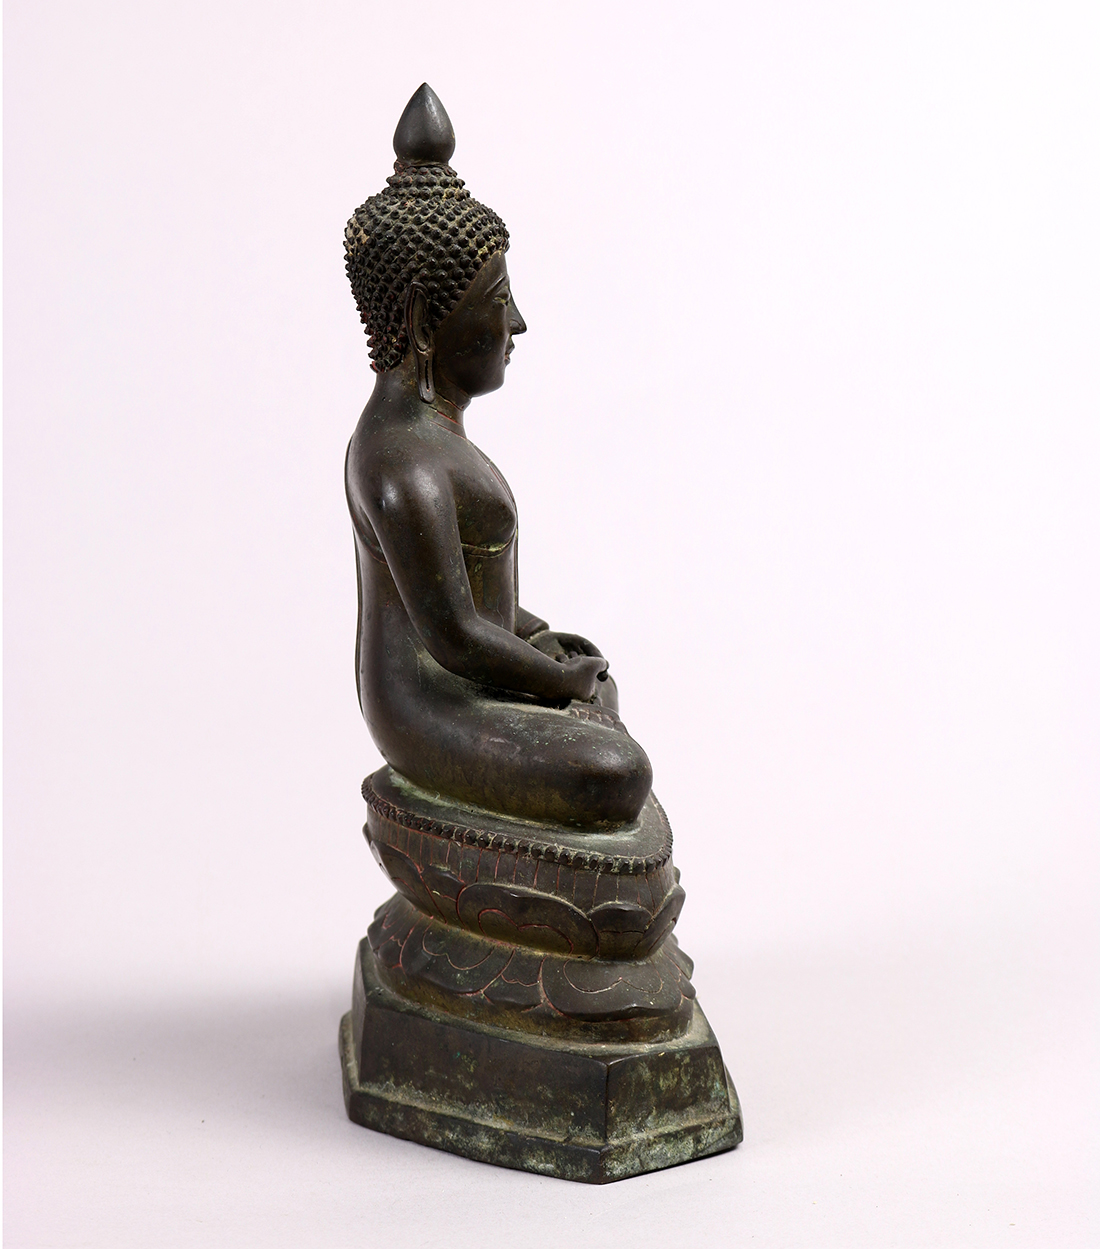 Thai bronze Buddha, 19th century, seated and in dhyana mudra on a double lotus pedestal, 7.5"h - Image 3 of 7